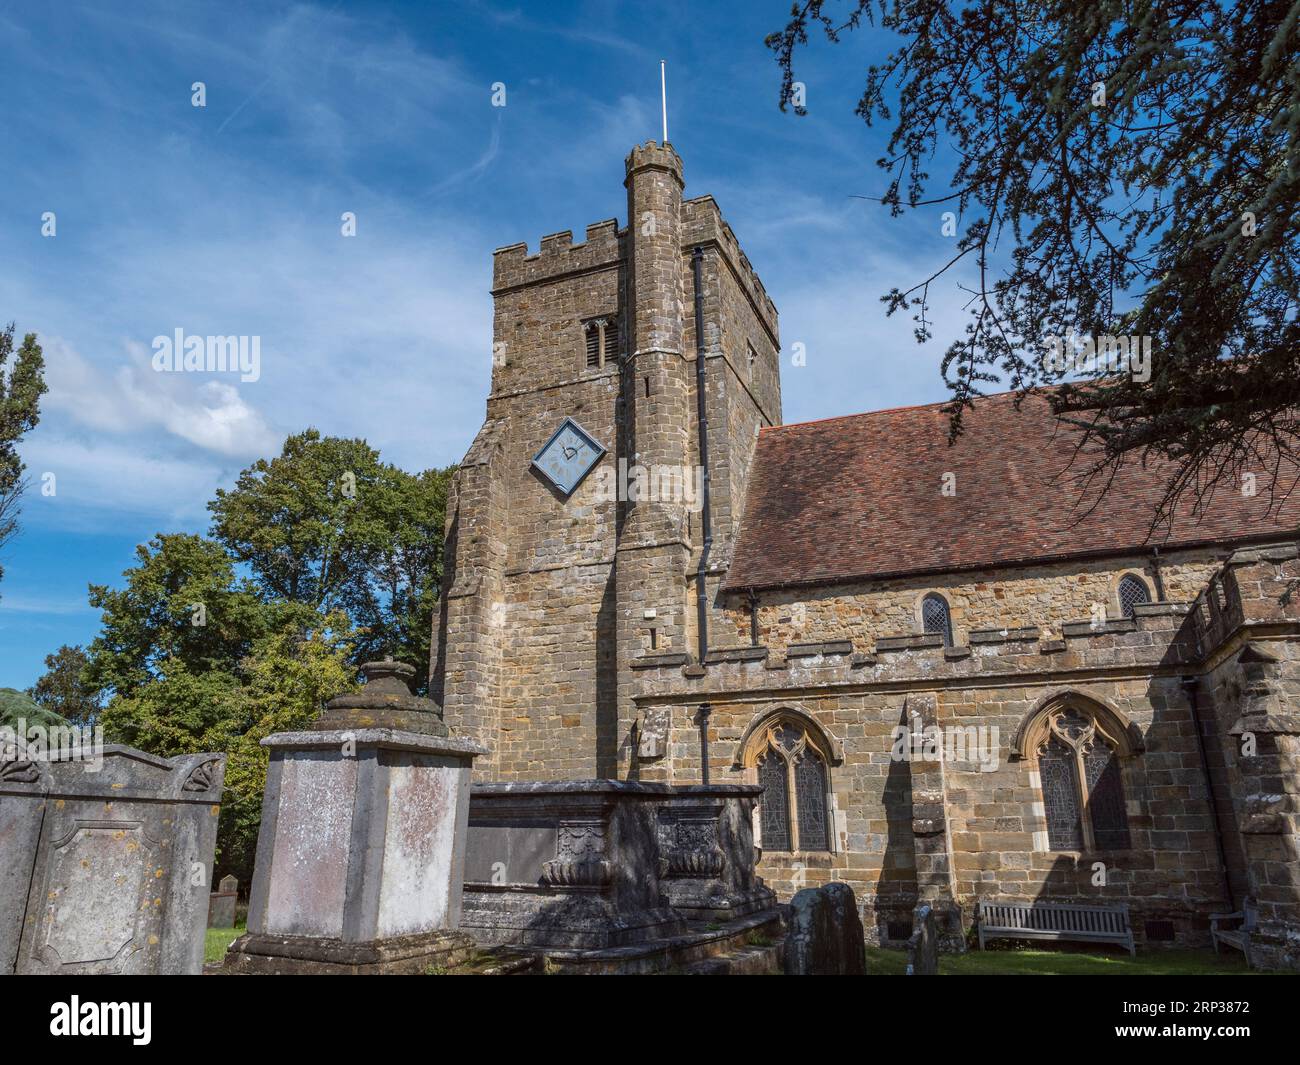 The Church of St Mary the Virgin in Battle (site of the 1066 Battle of Hastings), East Sussex, UK. Stock Photo